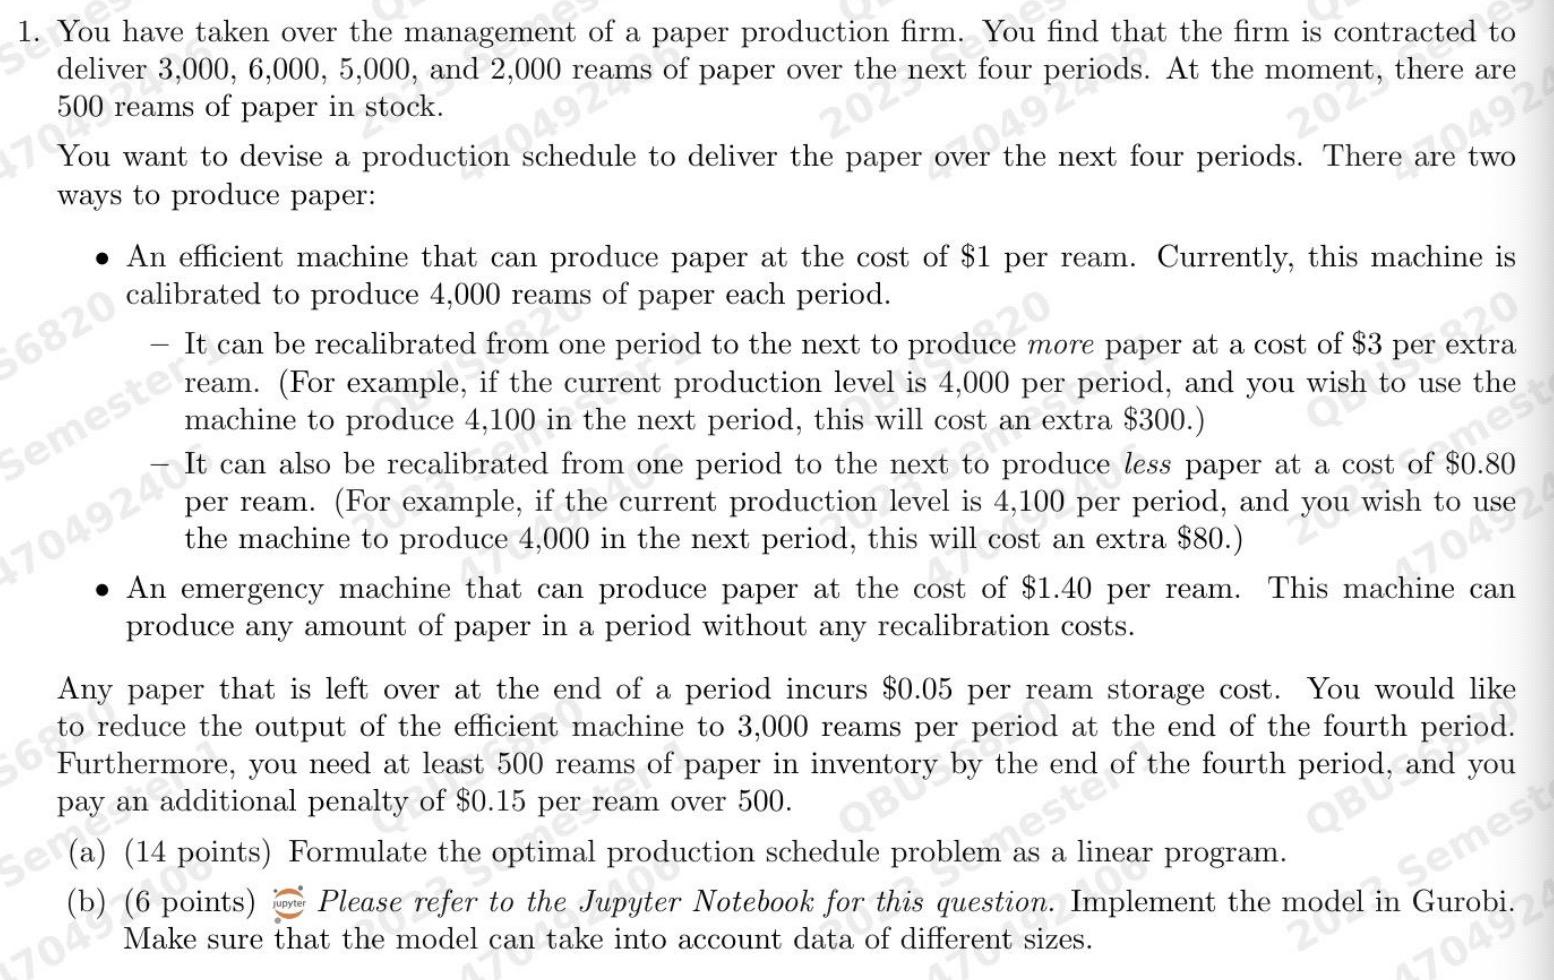 1. You have taken over the management of a paper production firm. You find that the firm is contracted to